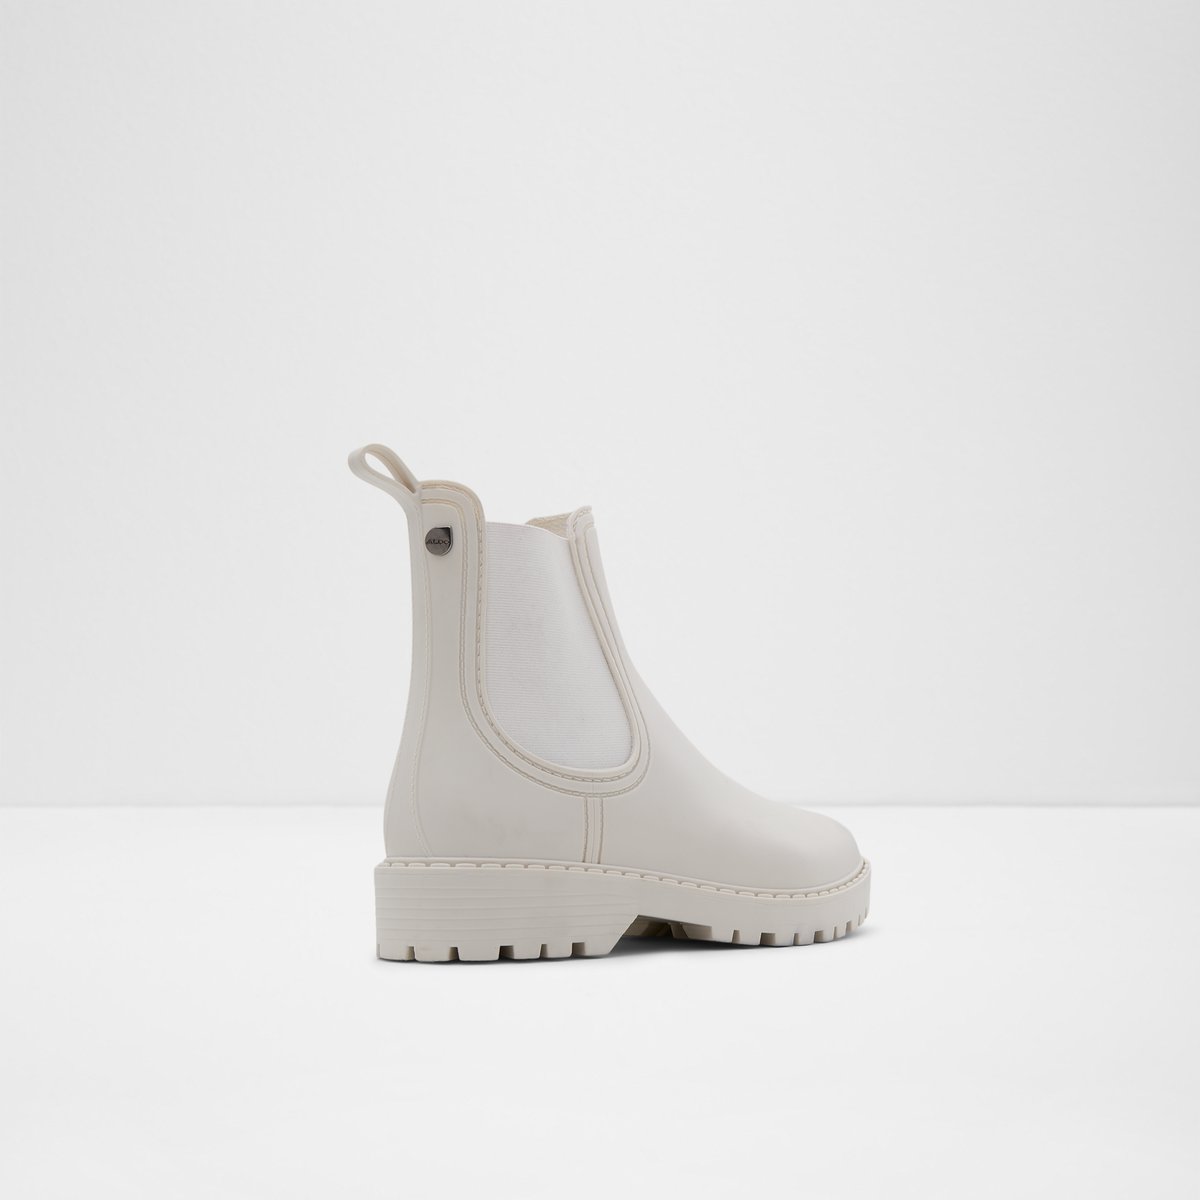 Change clothes Theoretical Clam Storm White Women's Casual boots | ALDO US